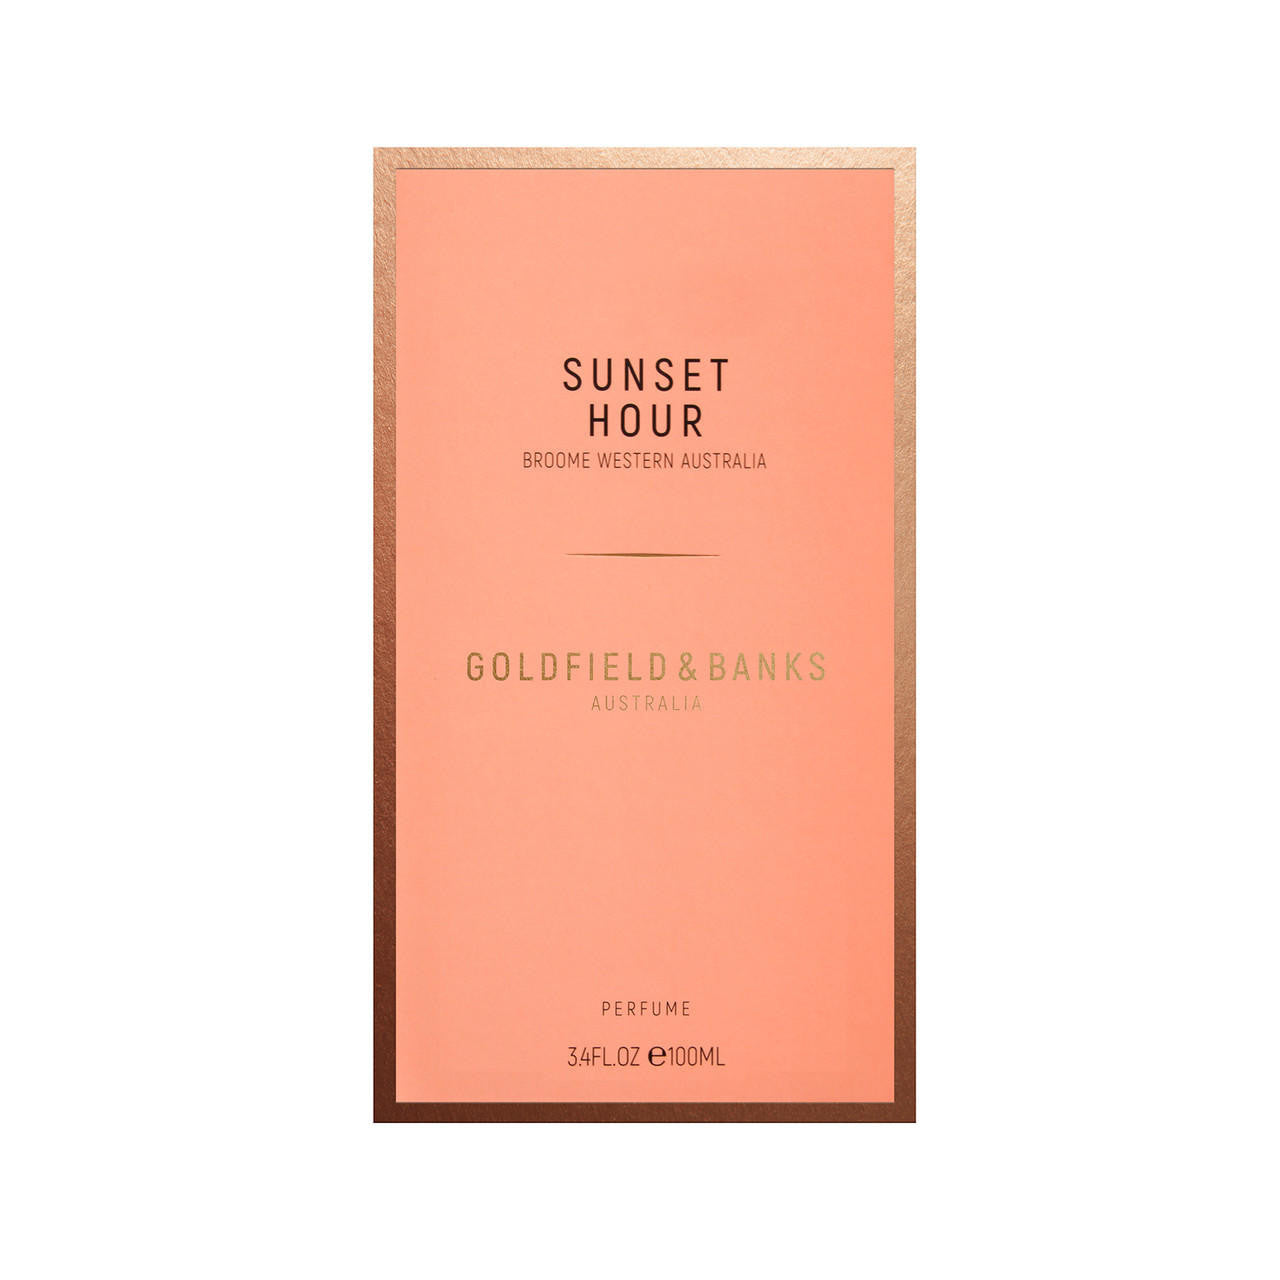  Goldfield & Banks Australia SUNSET HOUR Perfume Concentrate 